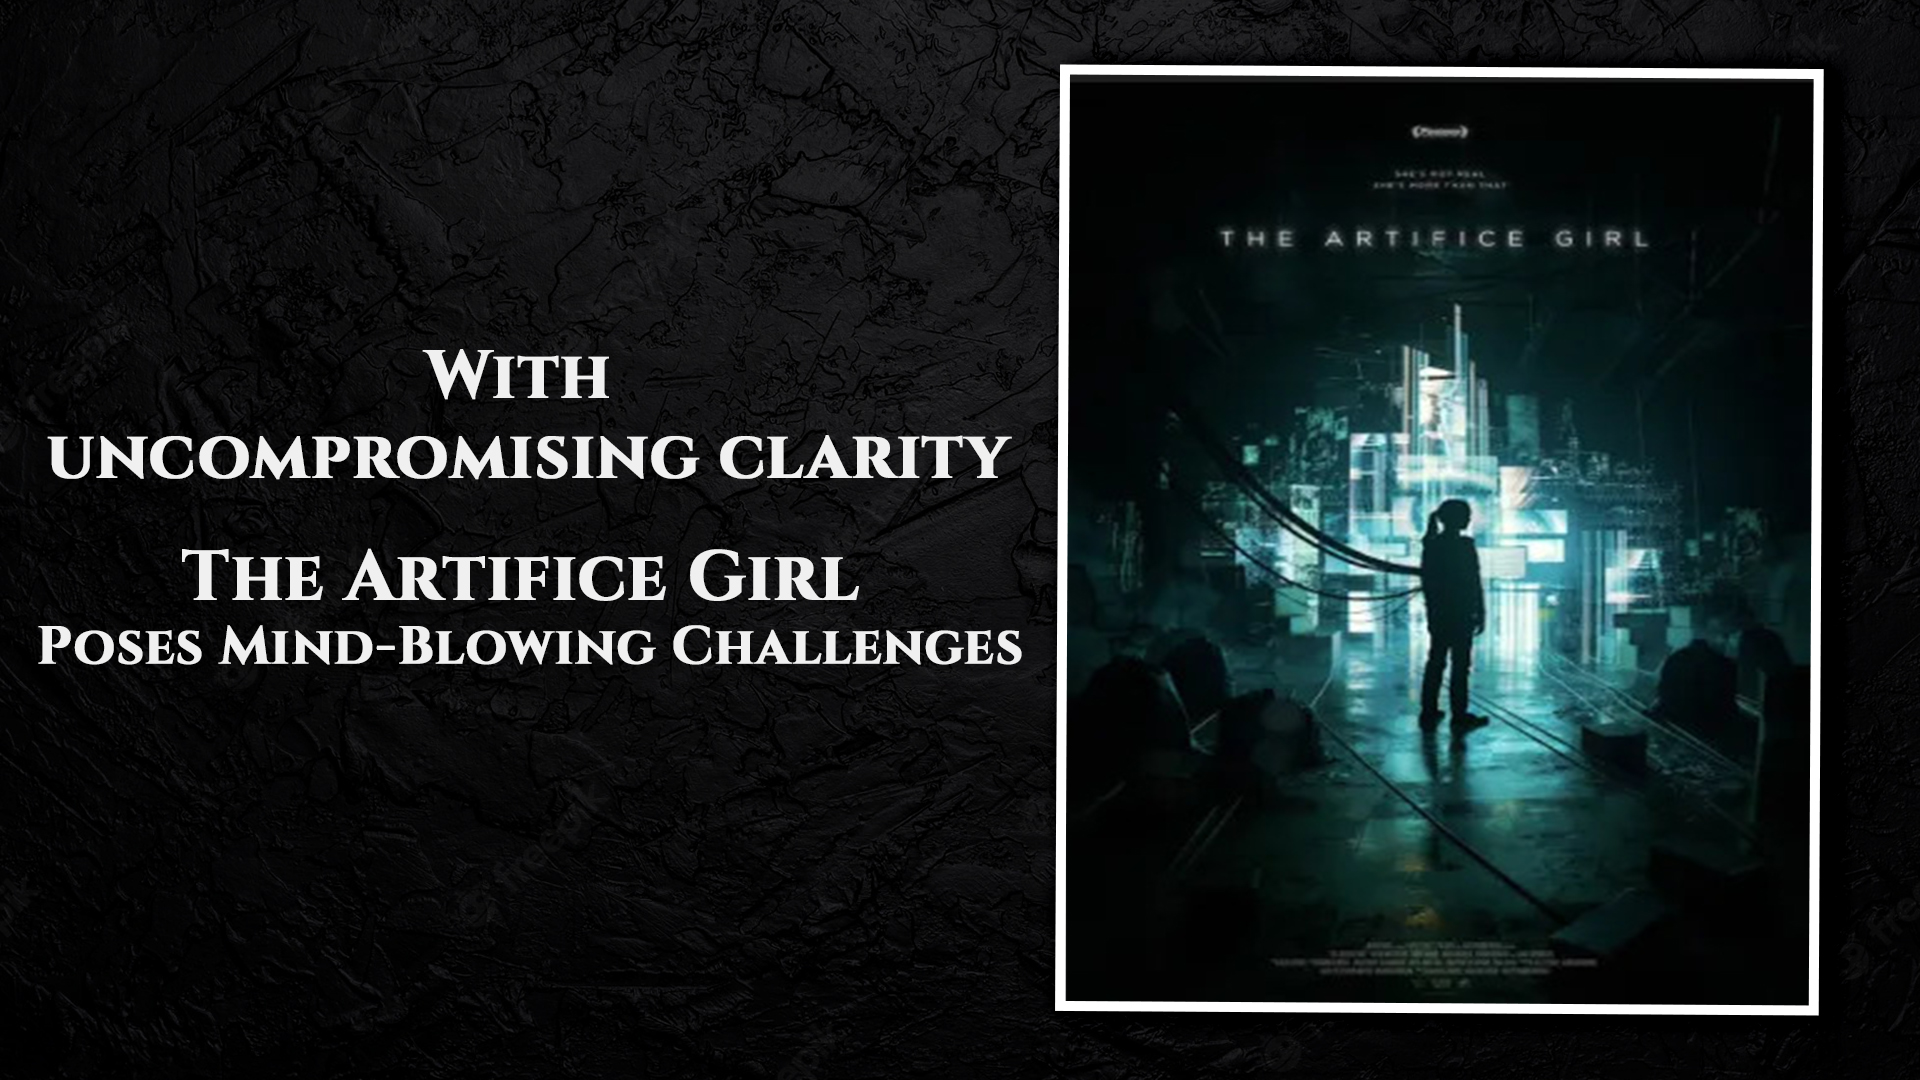 With Uncompromising Clarity 'The Artificial Girl' Poses Mind-Blowing Challenges